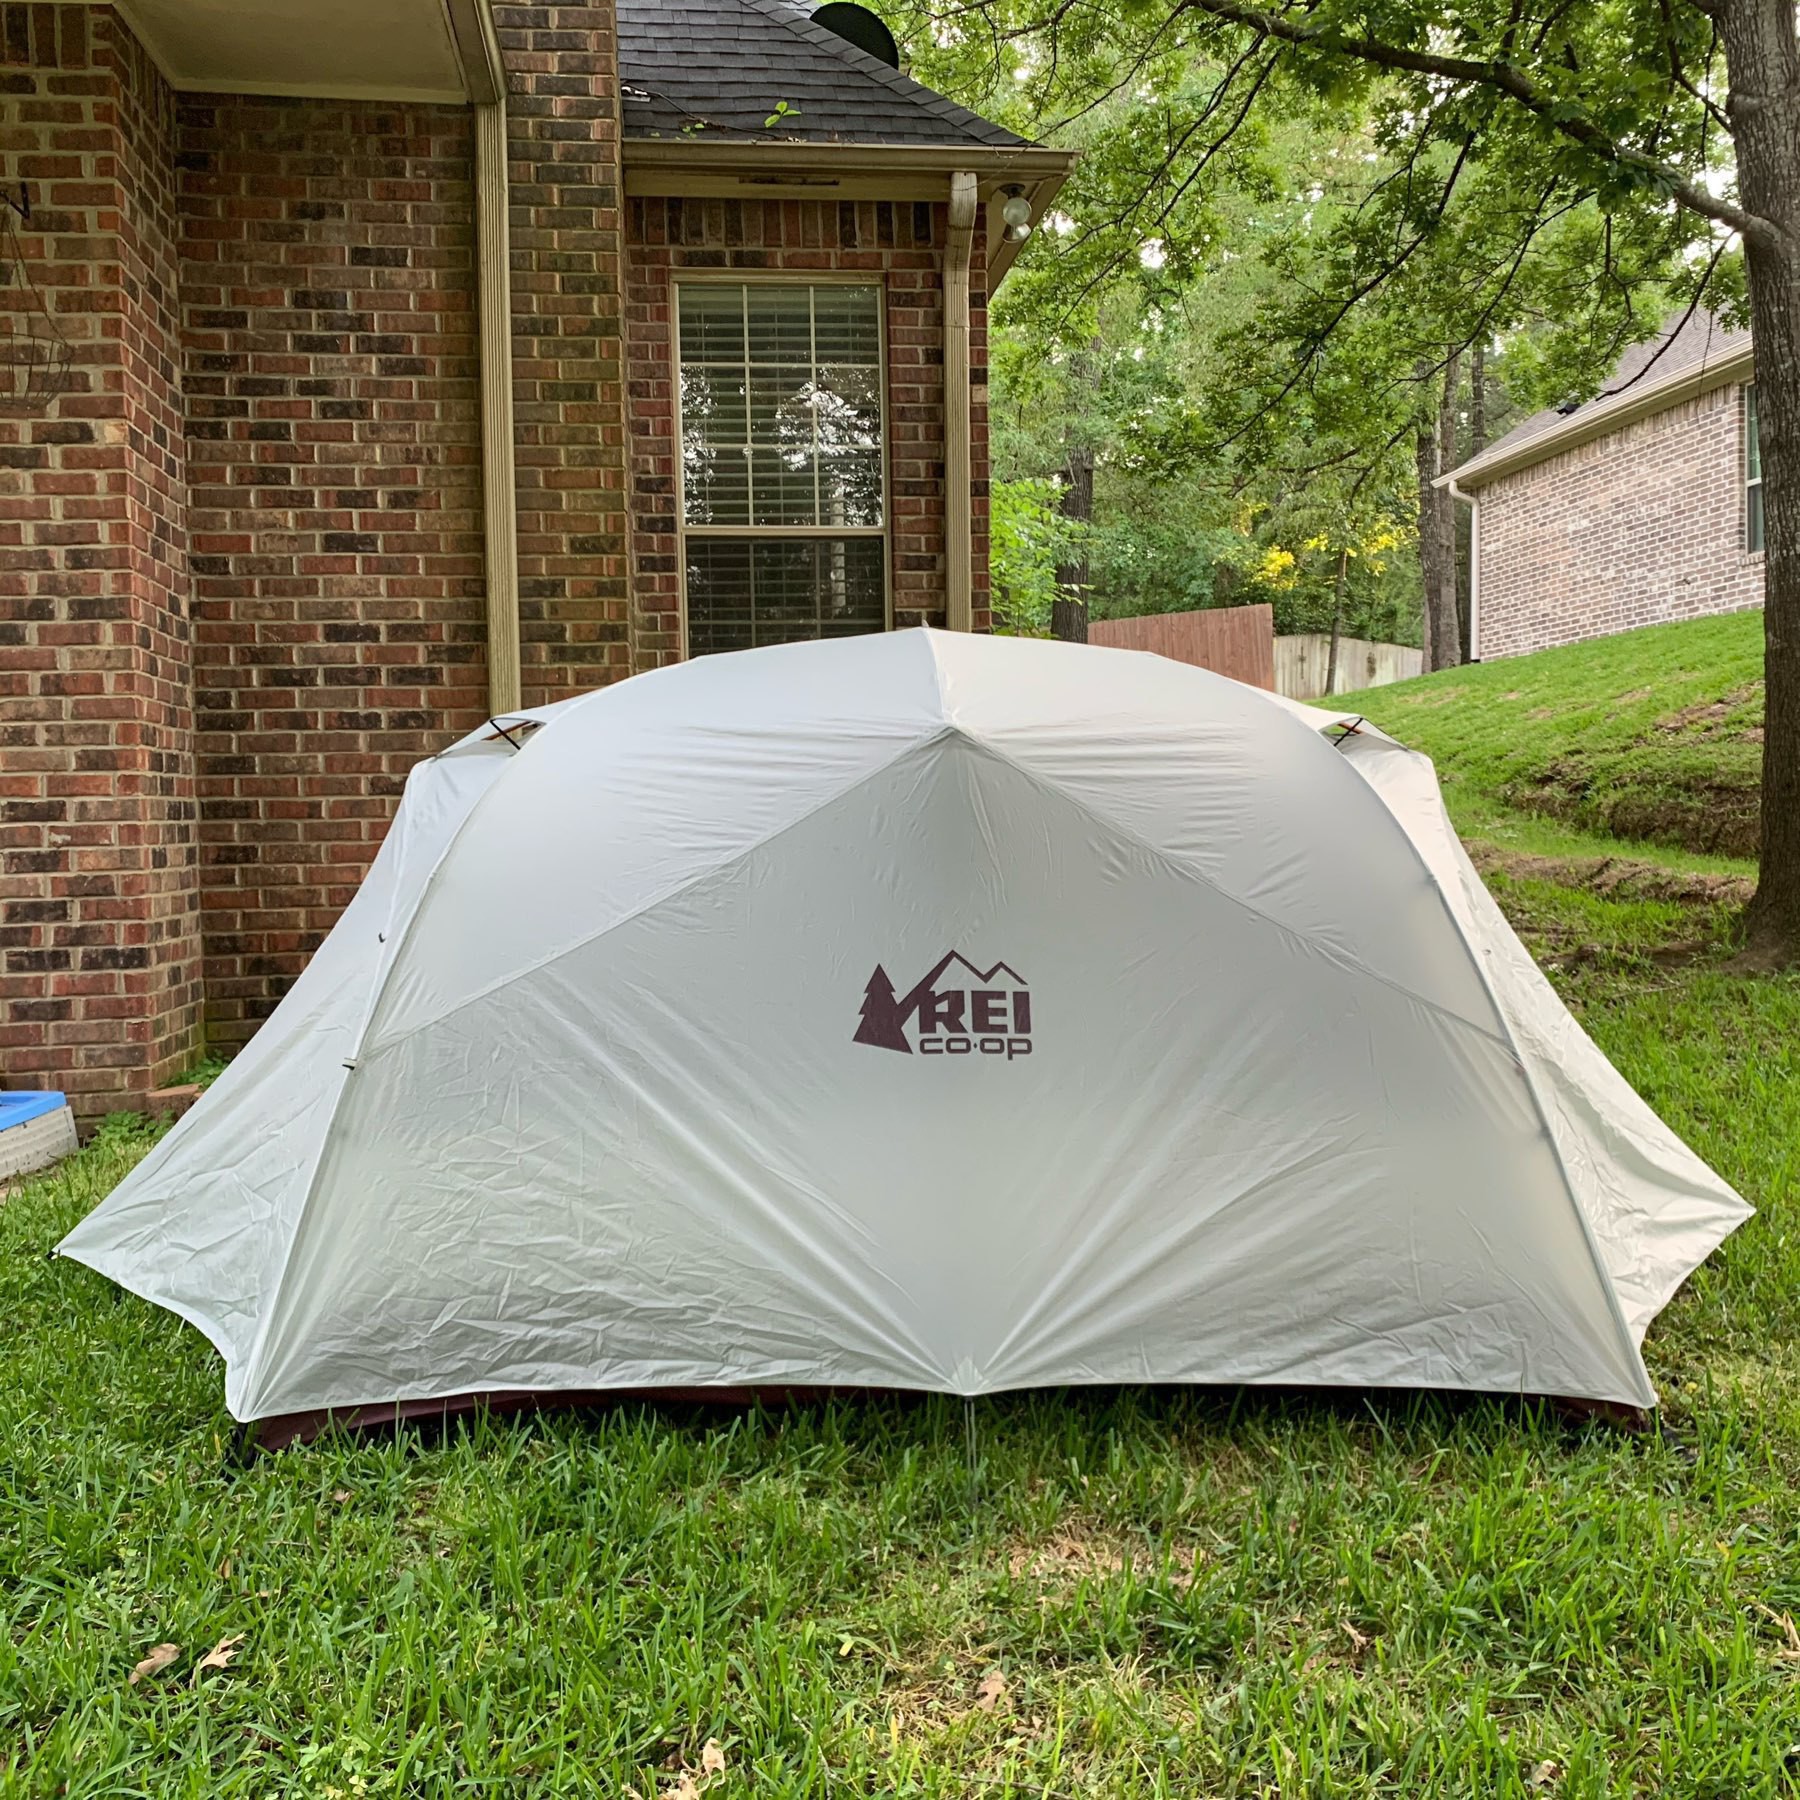 Tent pitched in the backyard